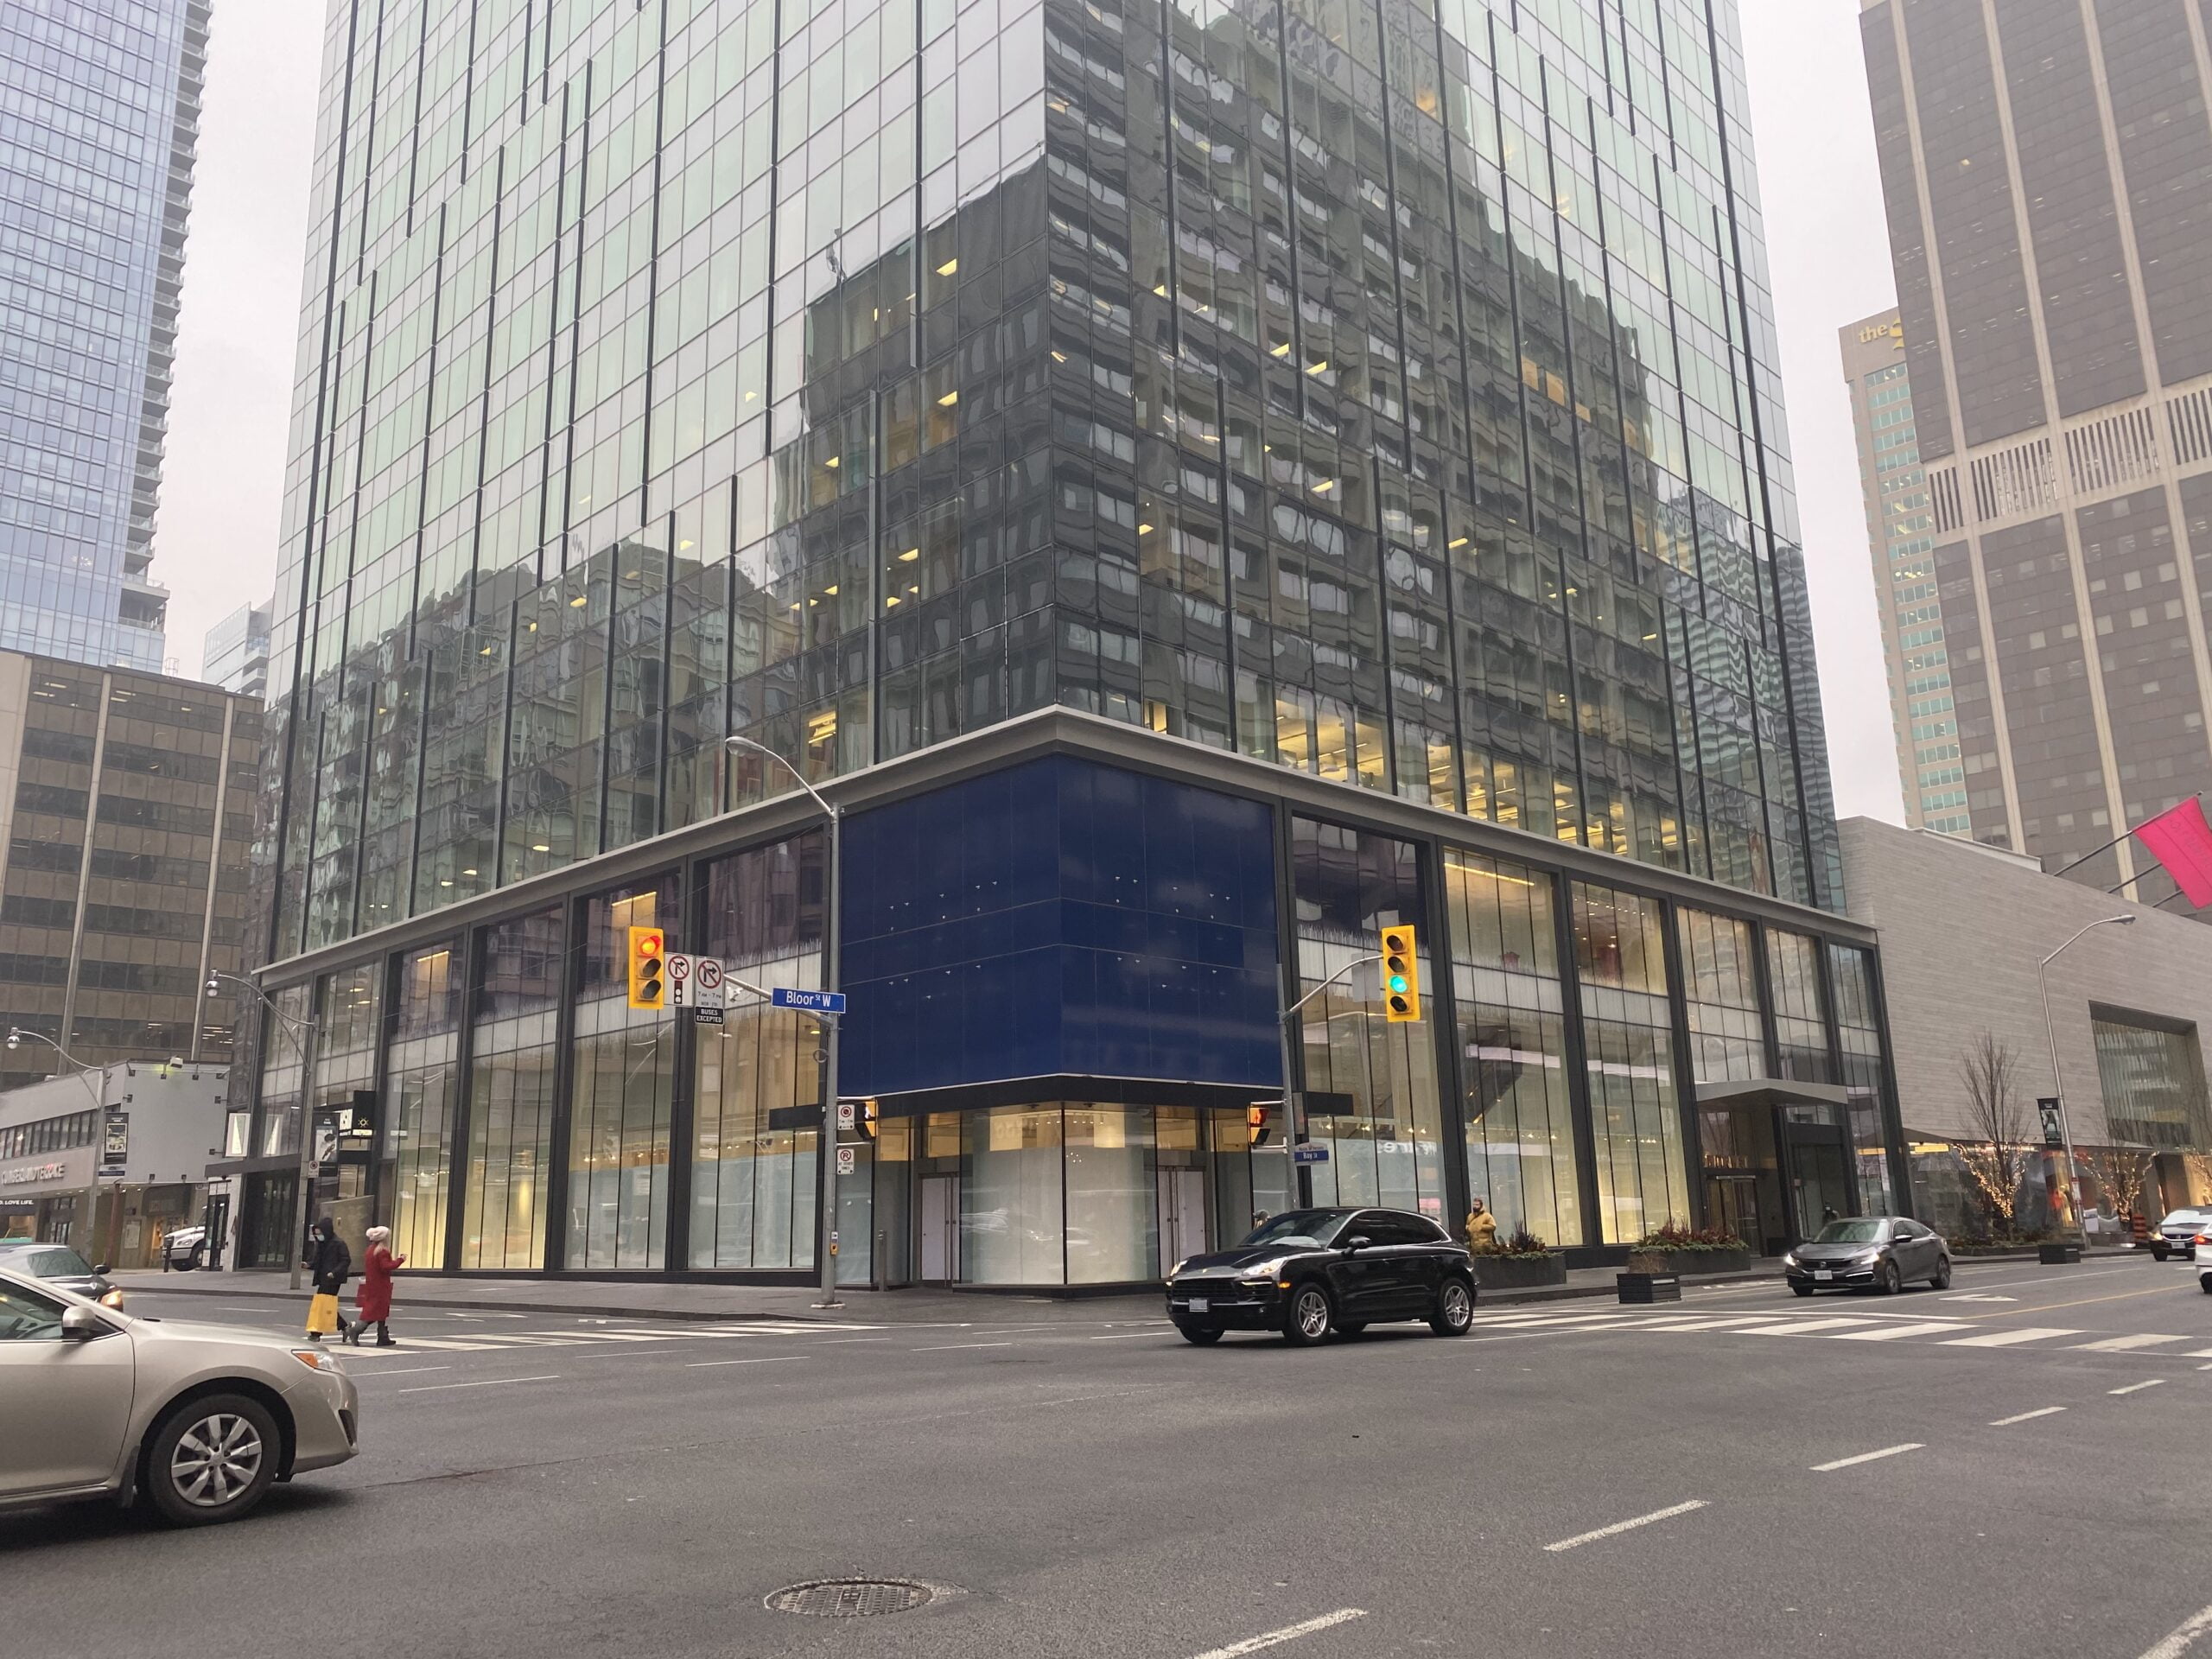 The Gap on Bloor Street West. Photo: Craig Patterson (January 14 2021)